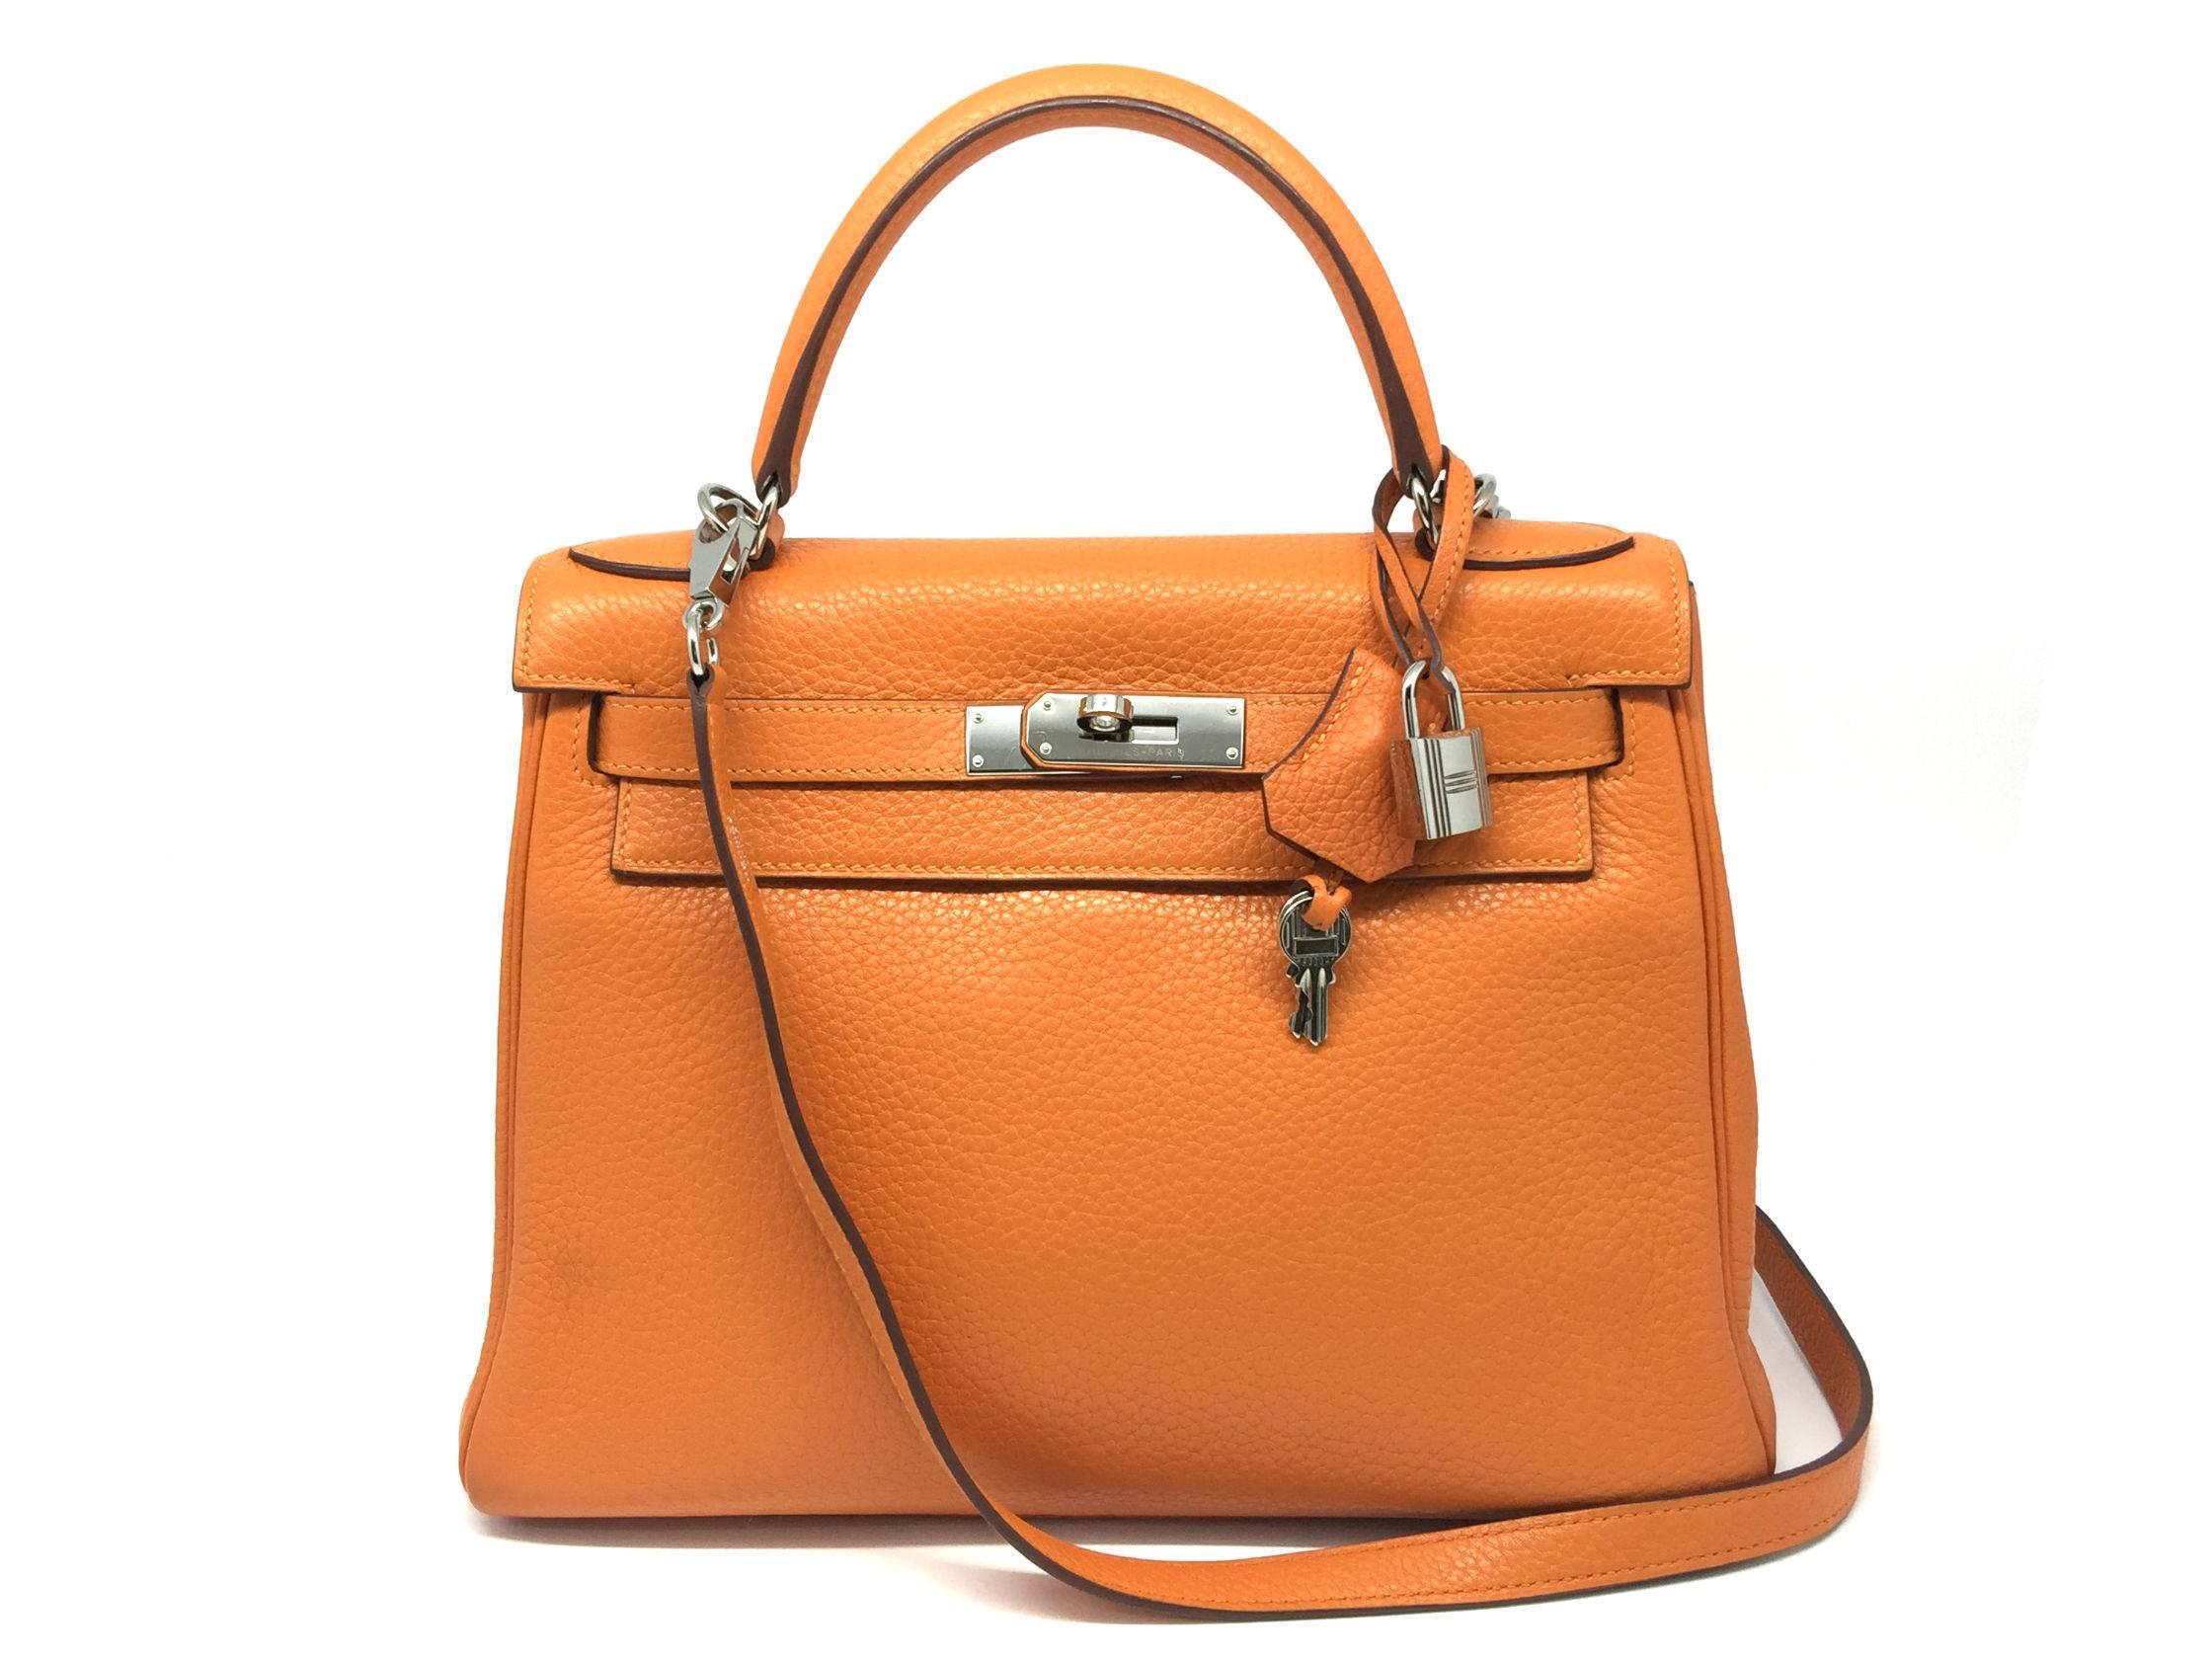 Color: Orange / Iris (designer color)
Material: Clemence Leather

Condition:
Rank A
Overall: Good, few minor defects
Surface: Good
Corners: Minor Scratches & Stains
Edges: Good
Handles/Straps: Minor Scratches &Stains
Hardware: Minor